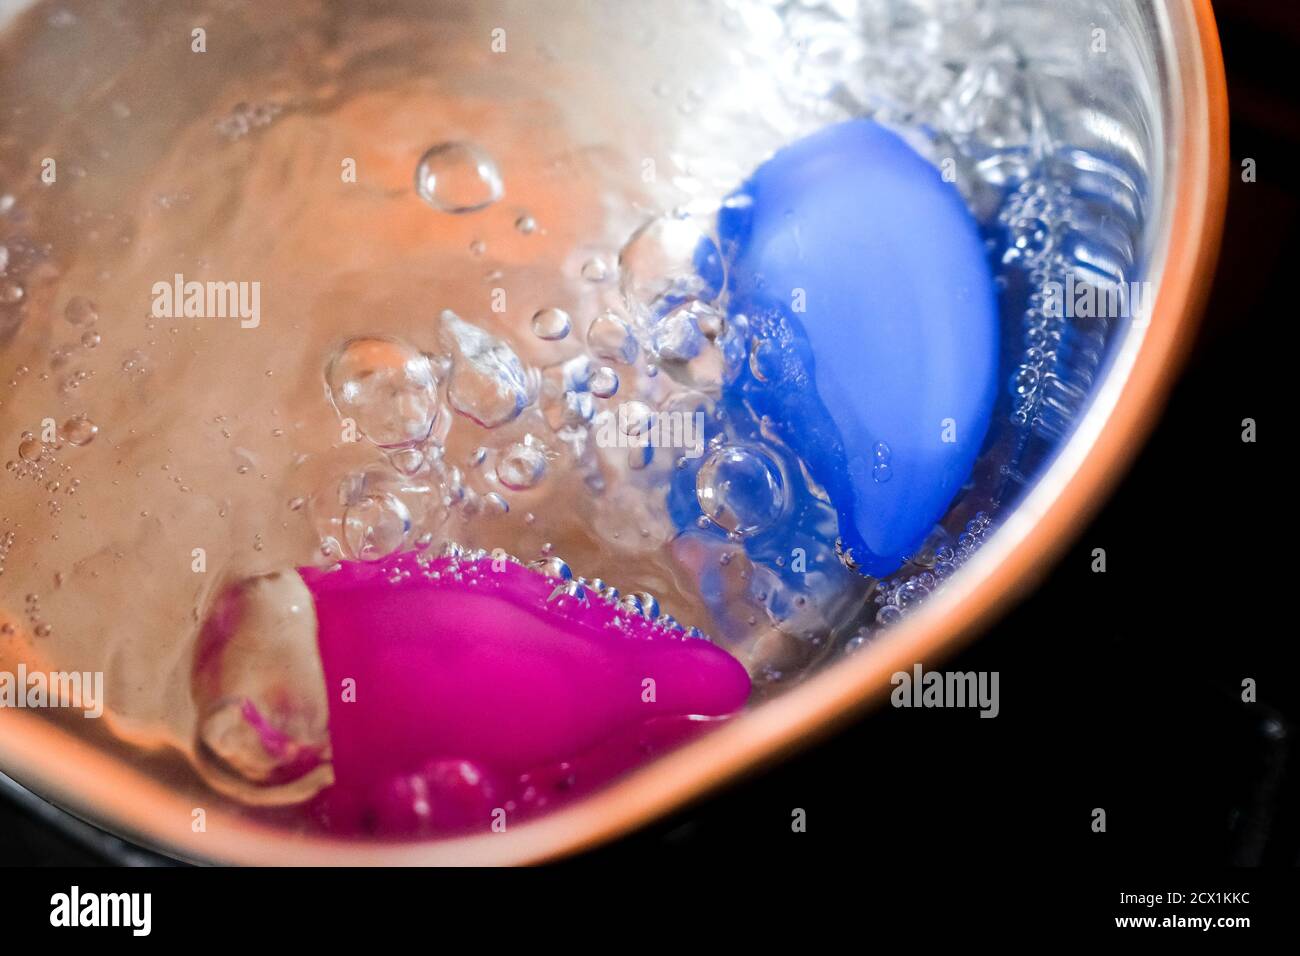 Boil the menstrual cups in a saucepan. Water bubbles visible. Stock Photo